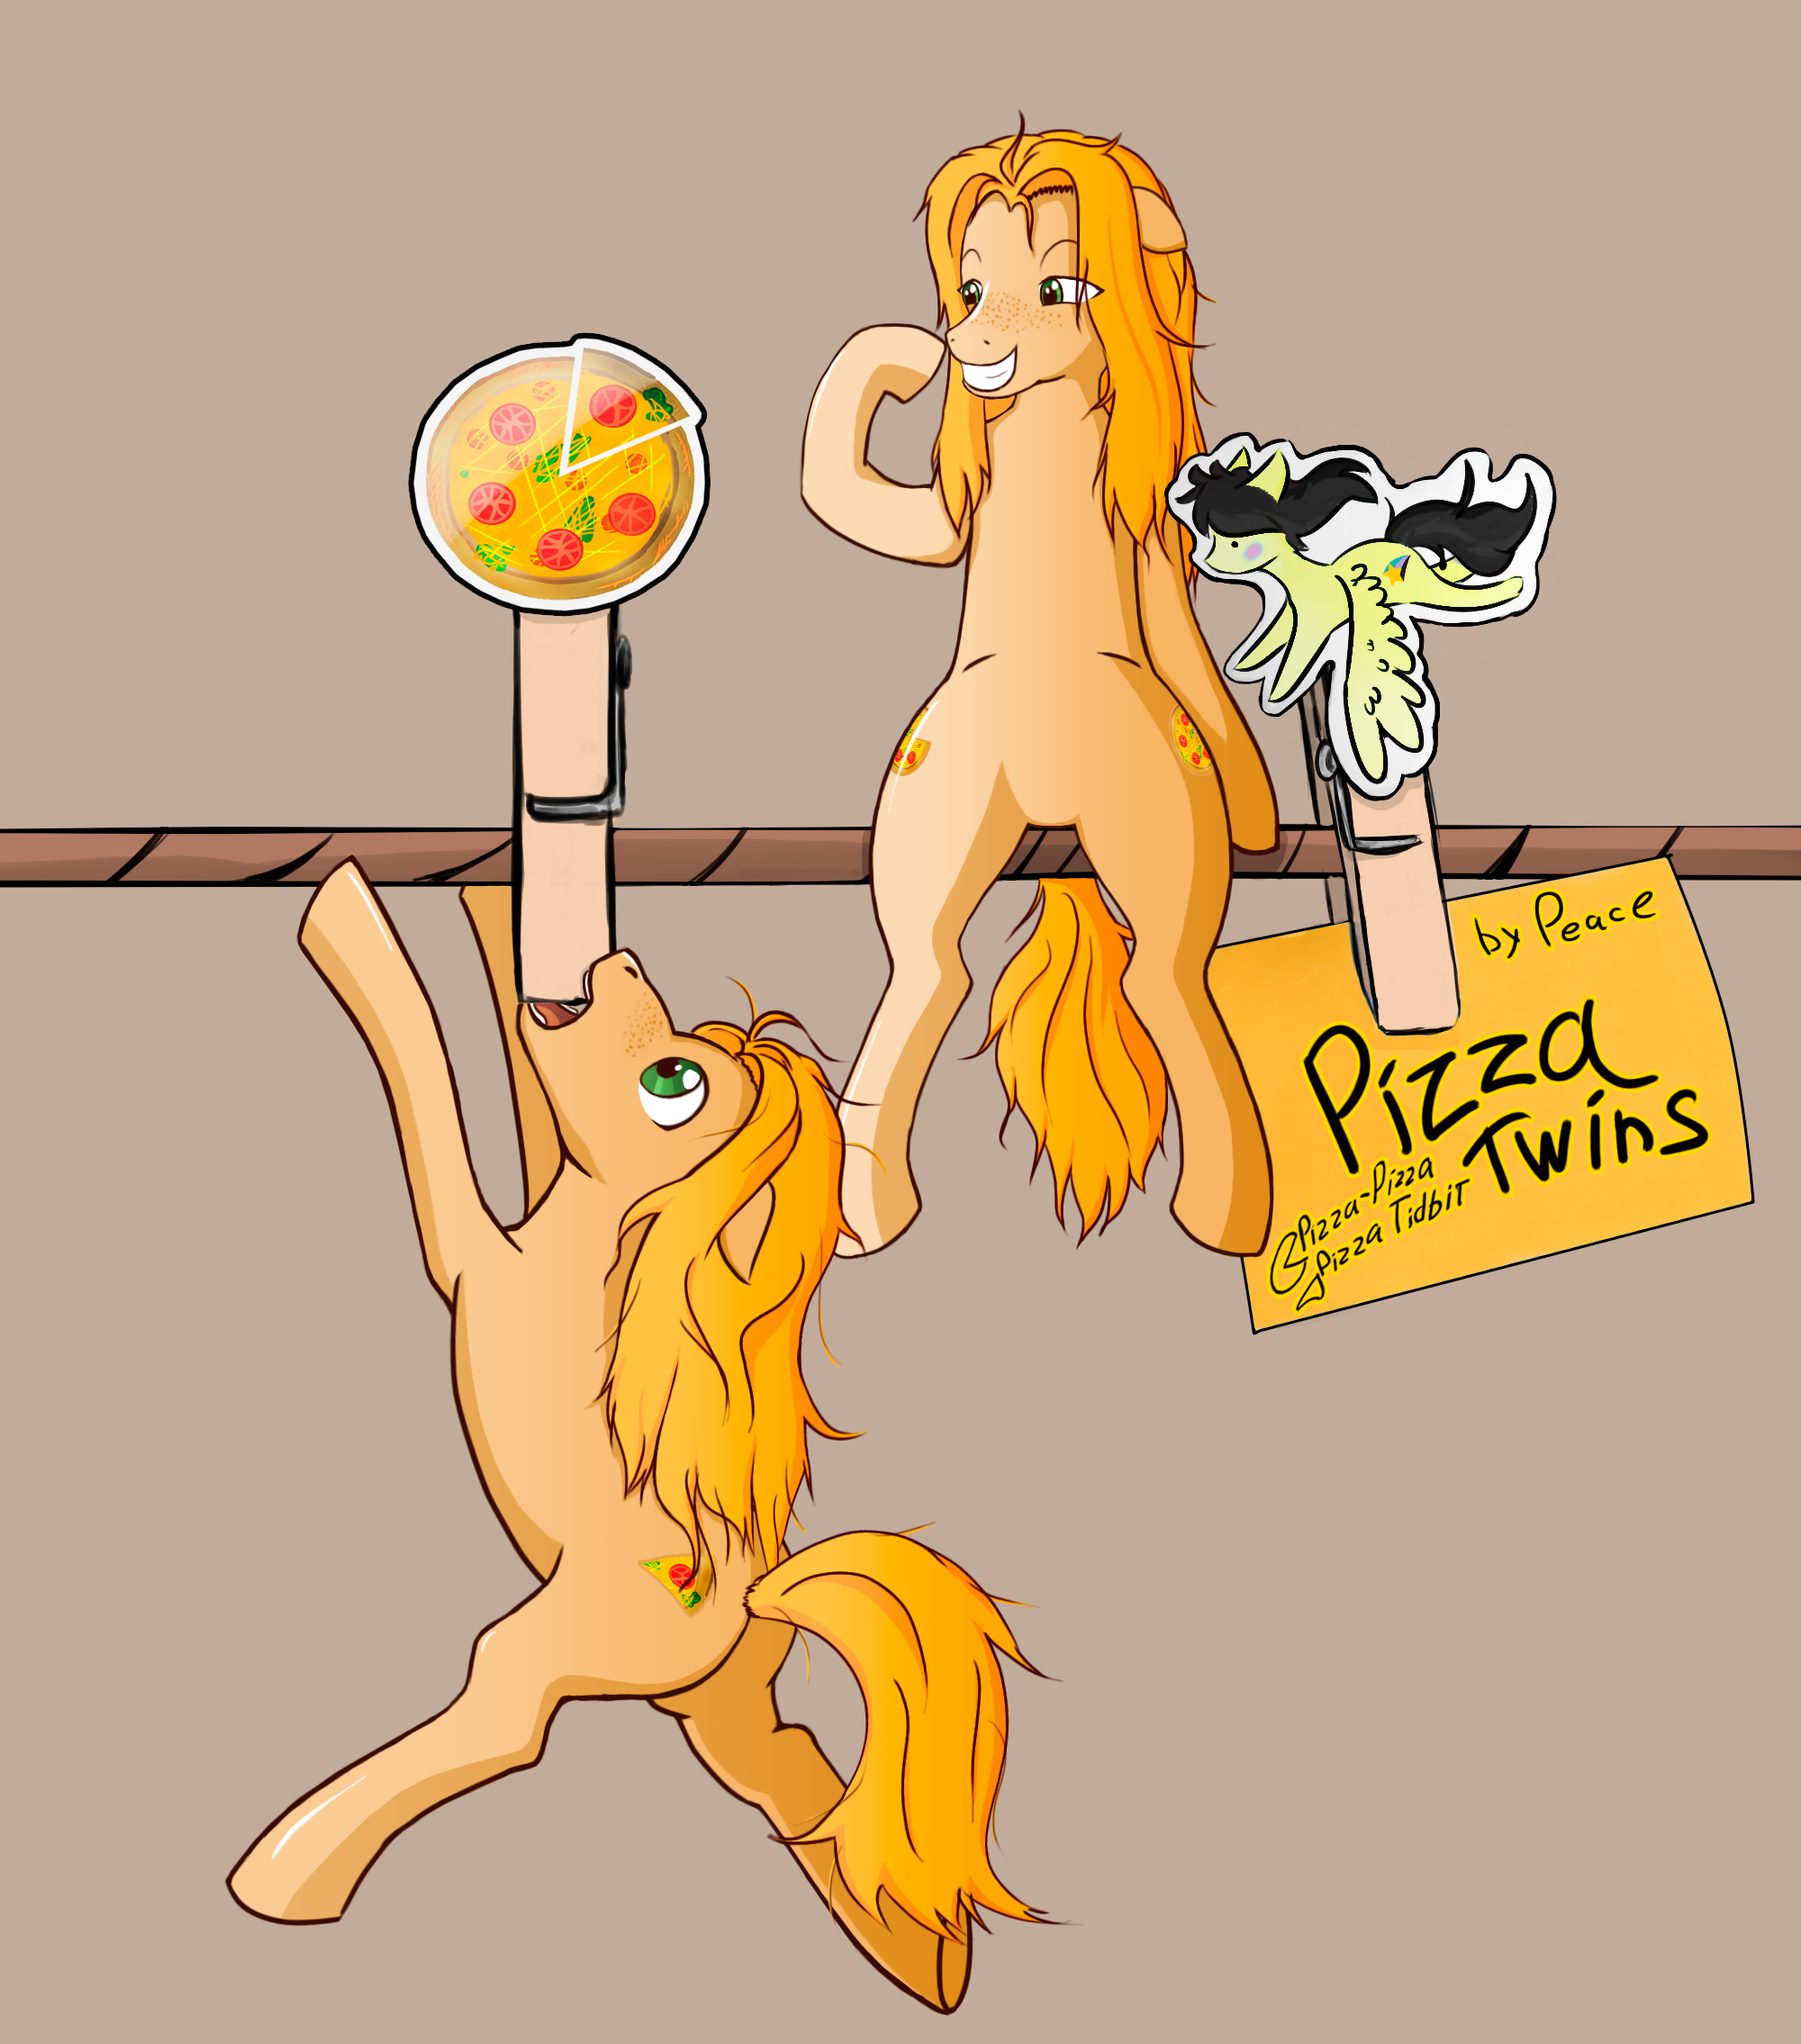 pizza_twins_by_ene_peace-d83k9ow.png